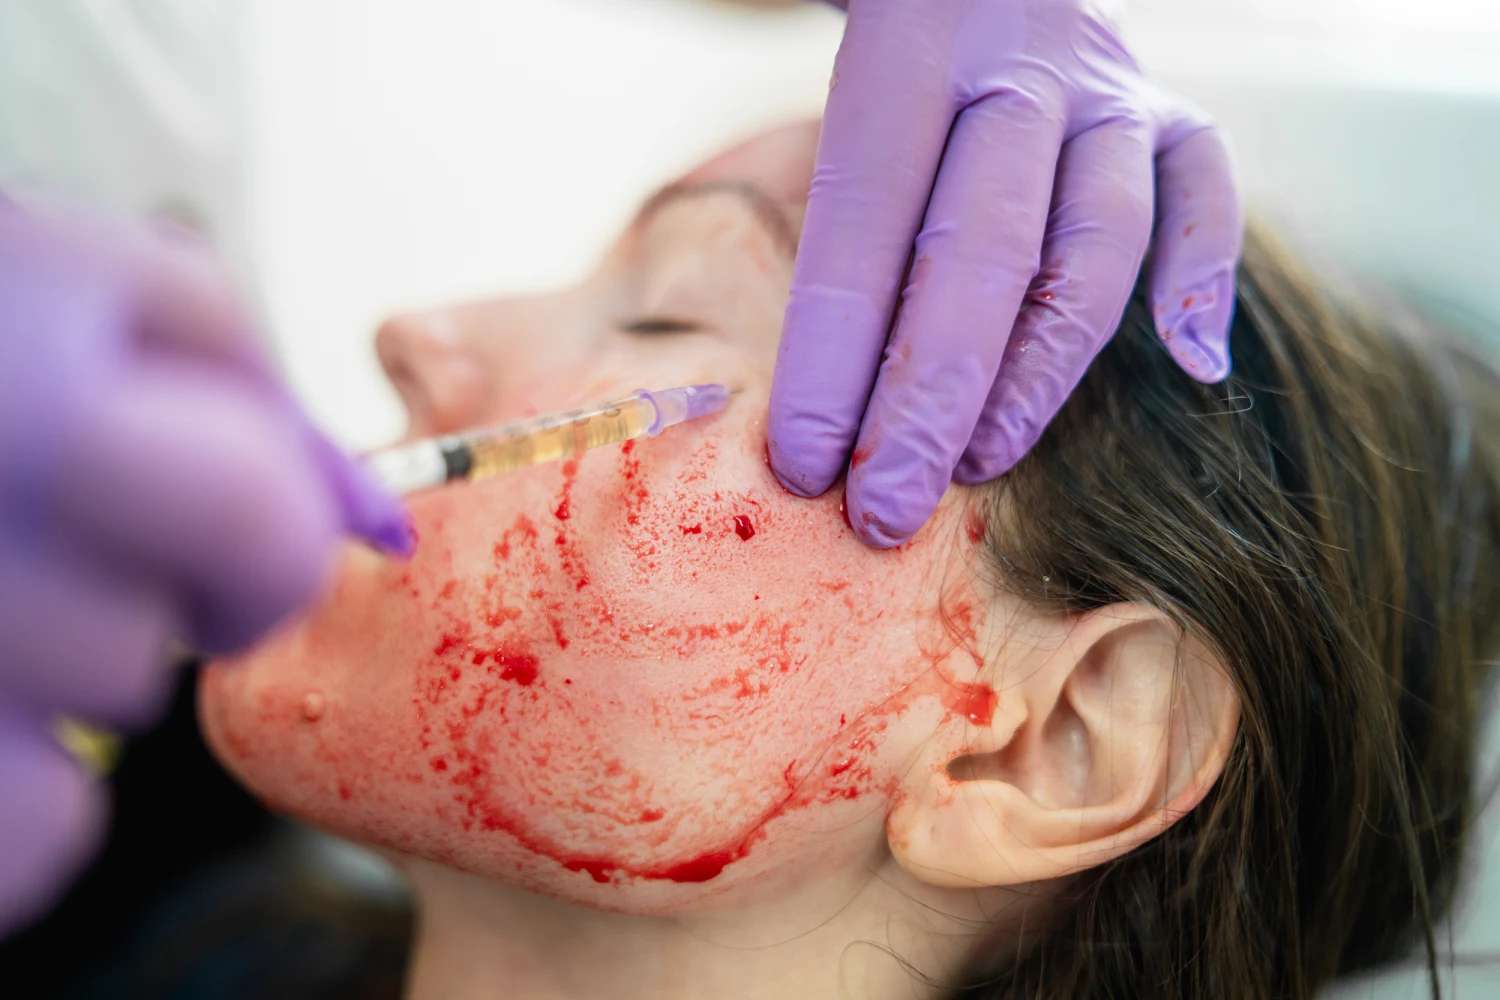 At Least Three Women Were Infected With H.I.V. After ‘Vampire Facials’